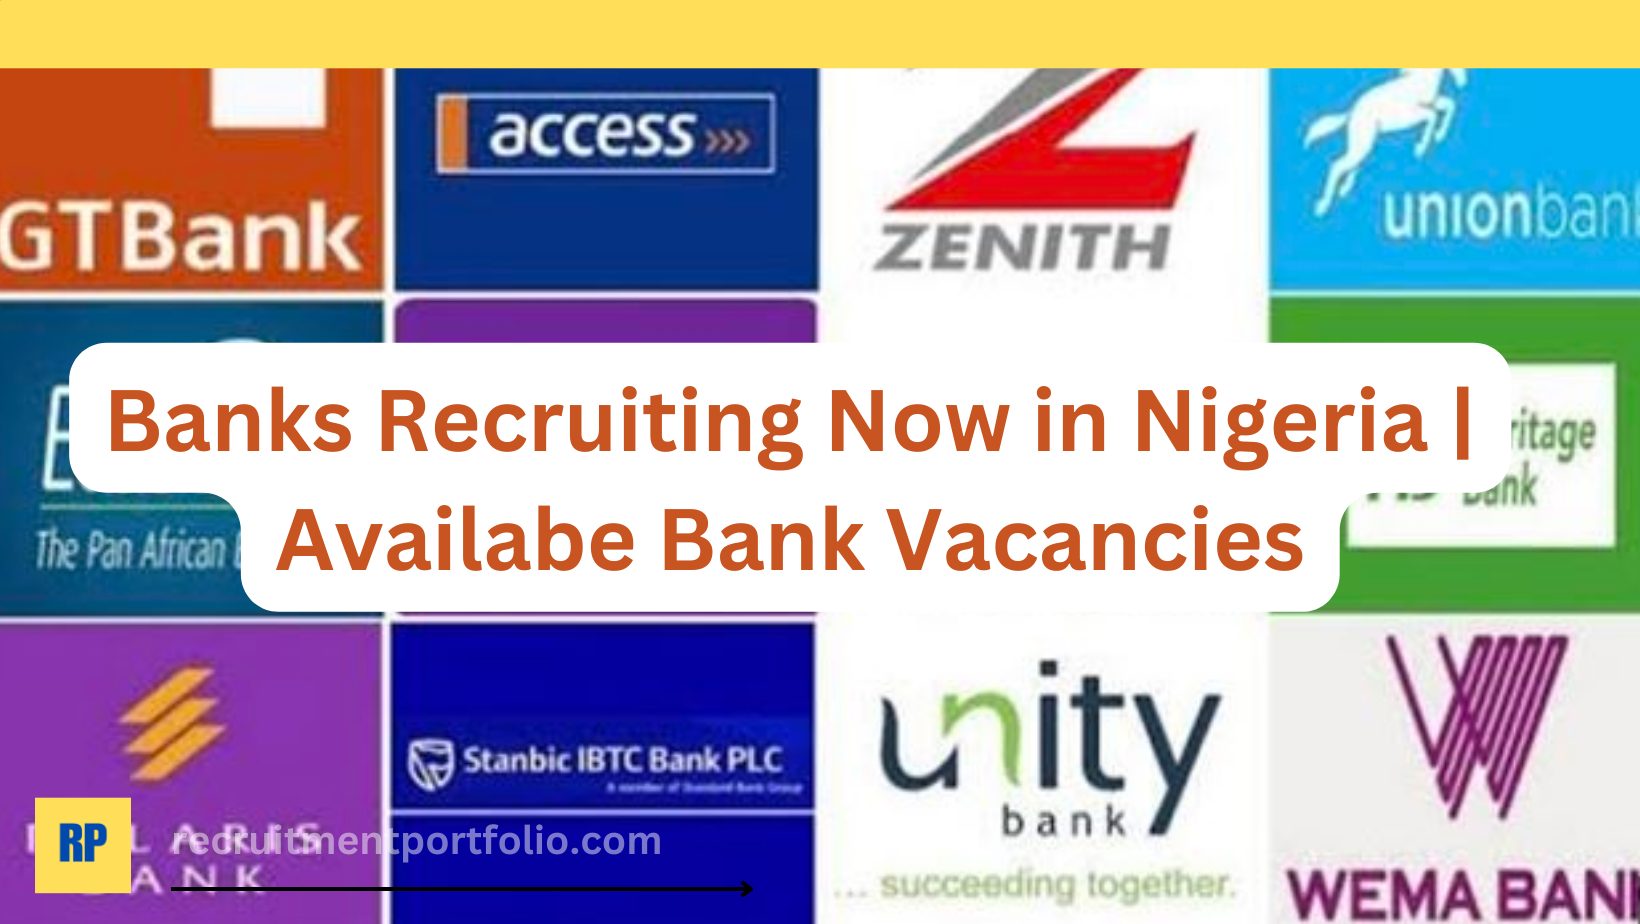 Banks Recruiting Now in Nigeria